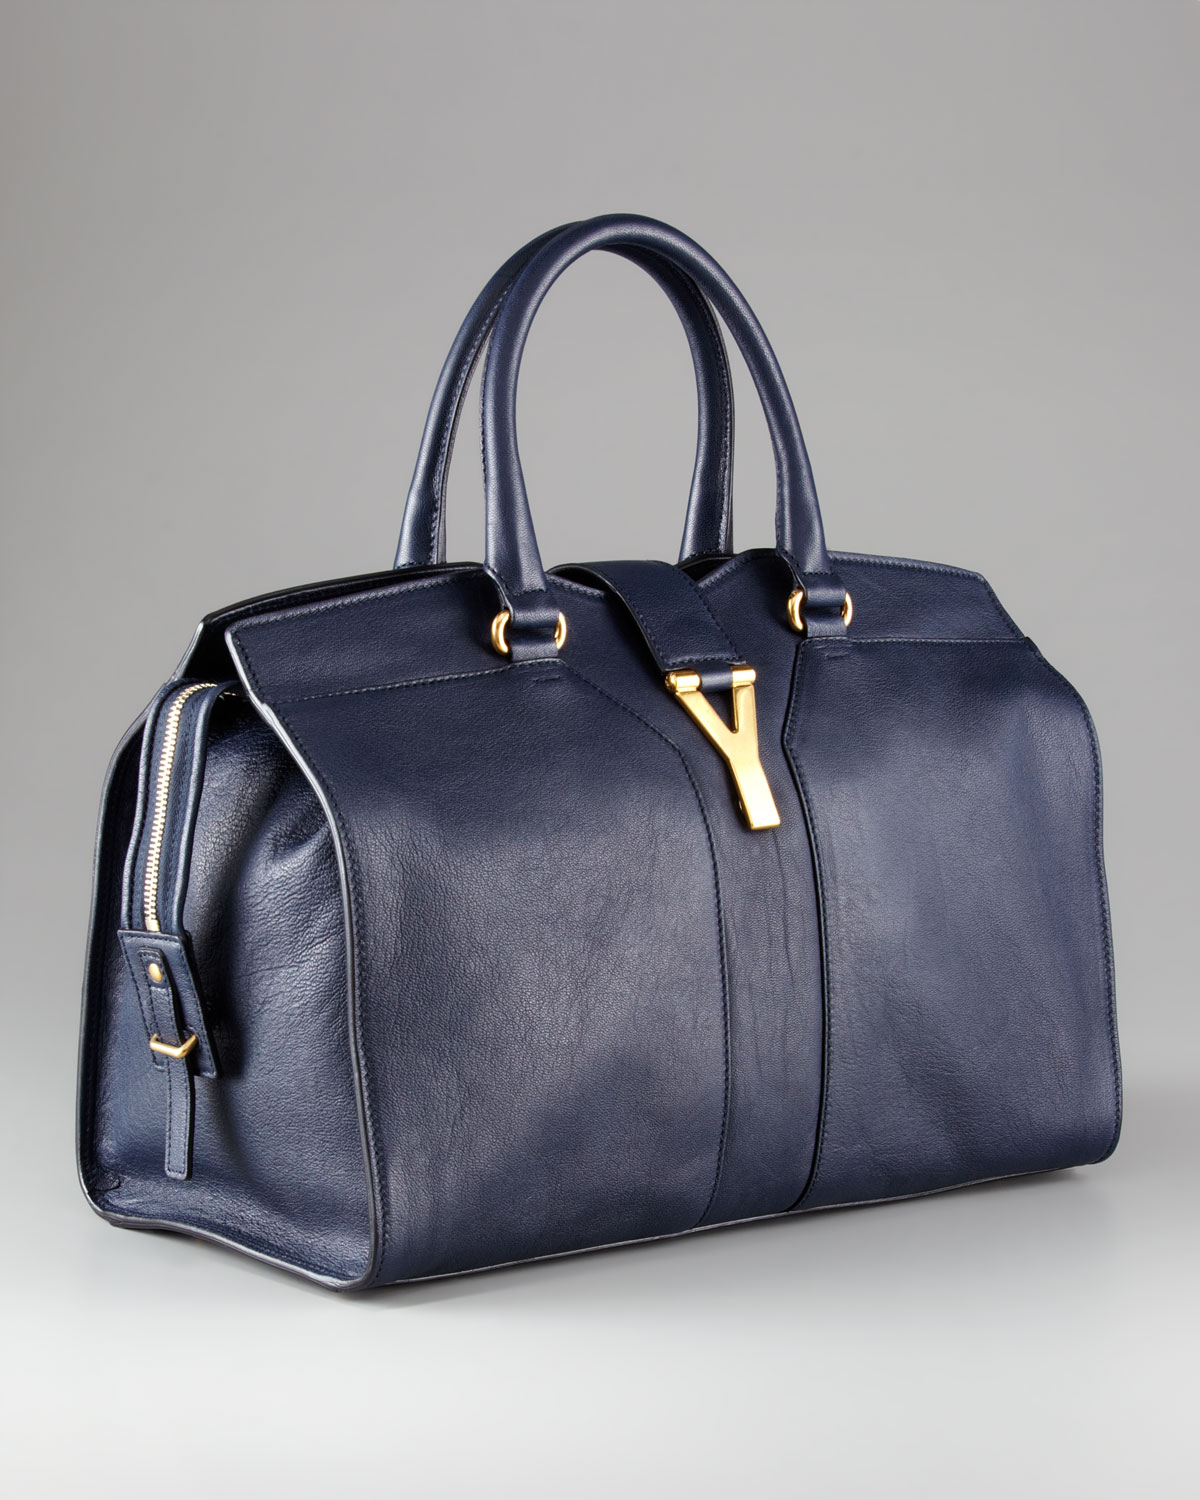 Saint laurent Cabas Chyc Medium Extra-wide Tote in Blue (corda) | Lyst  